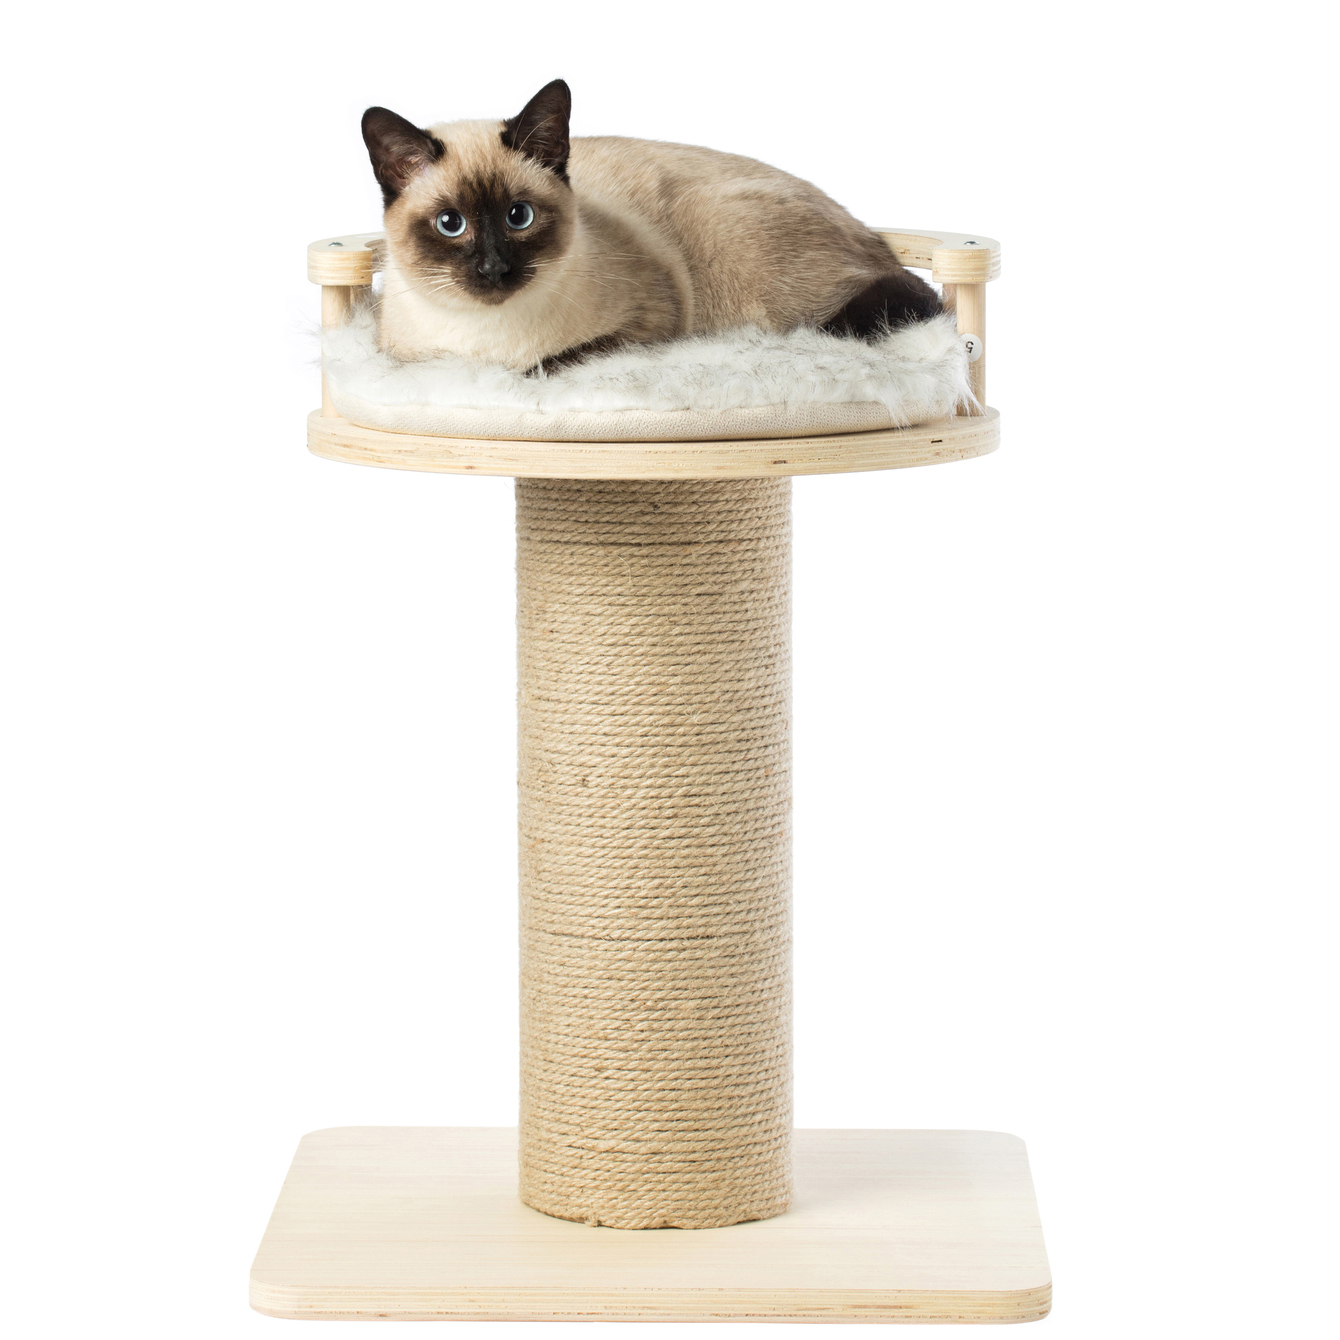 Furrytail Cute Table Shape Cat Tree Tower Scratching Post with Cat House Bed Condo Solid Wood Made Light Green Color Scandinavian Style 